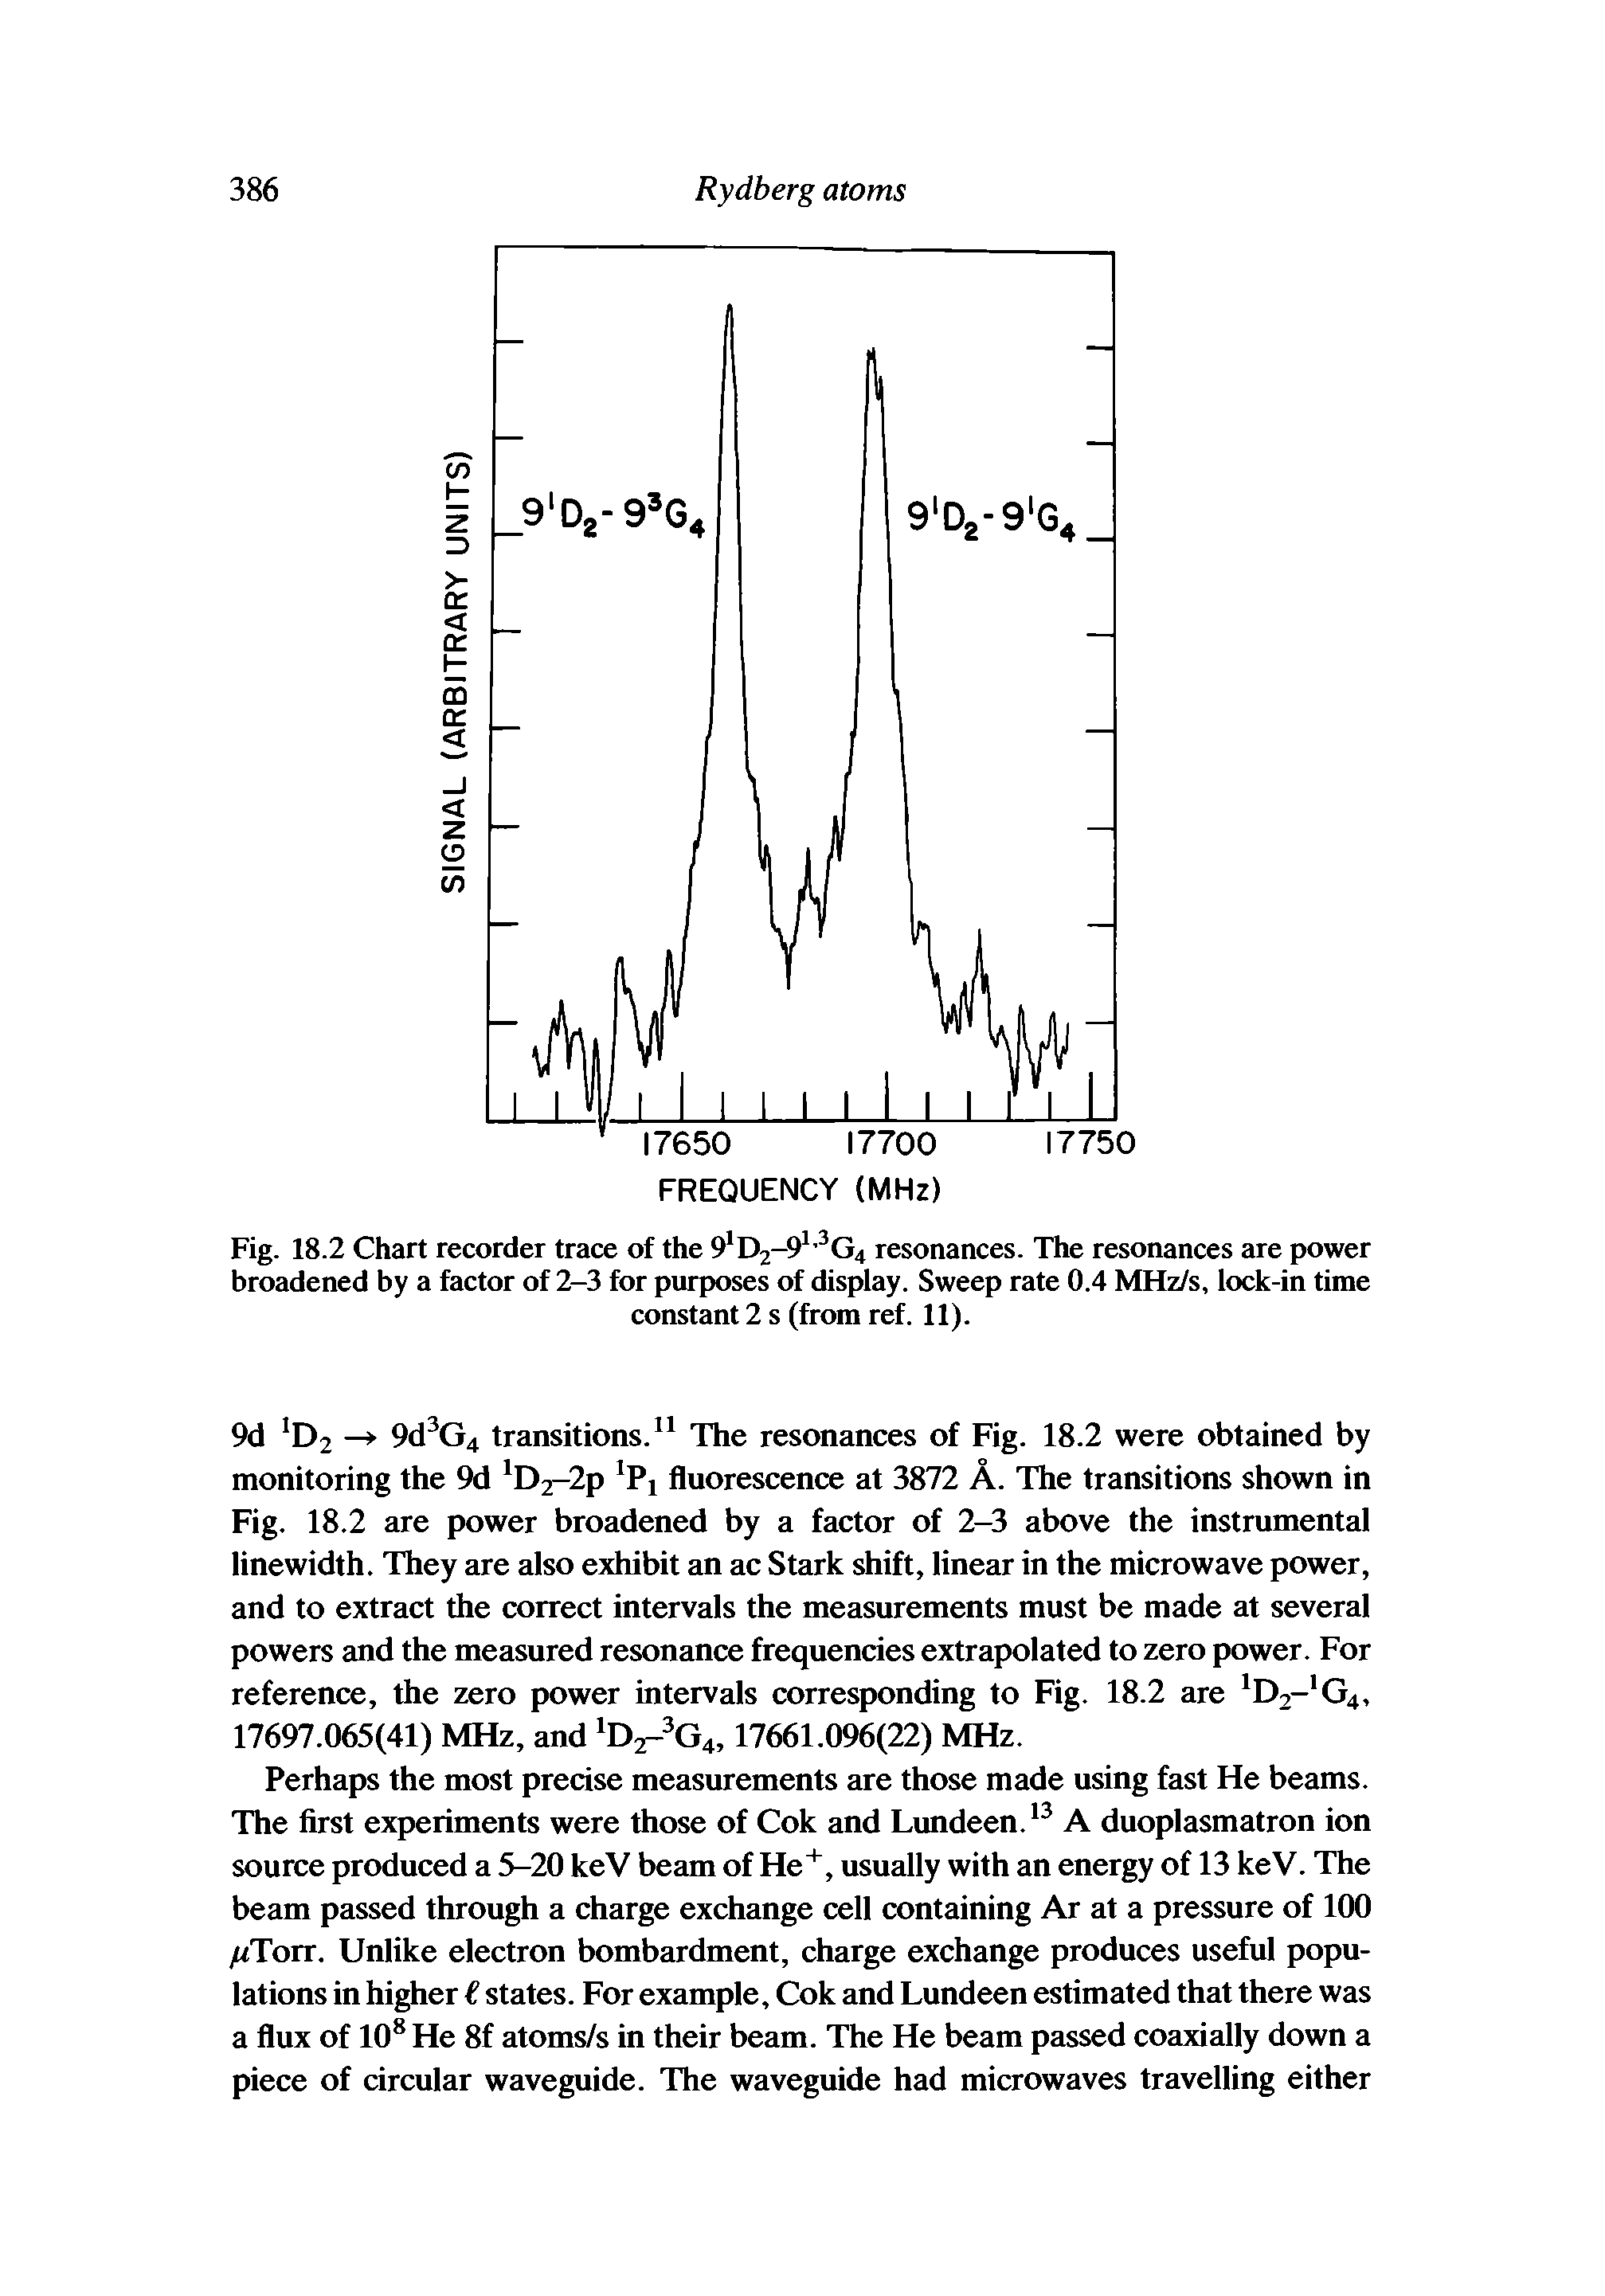 Fig. 18.2 Chart recorder trace of the 91D2-91,3G4 resonances. The resonances are power broadened by a factor of 2-3 for purposes of display. Sweep rate 0.4 MHz/s, lock-in time...